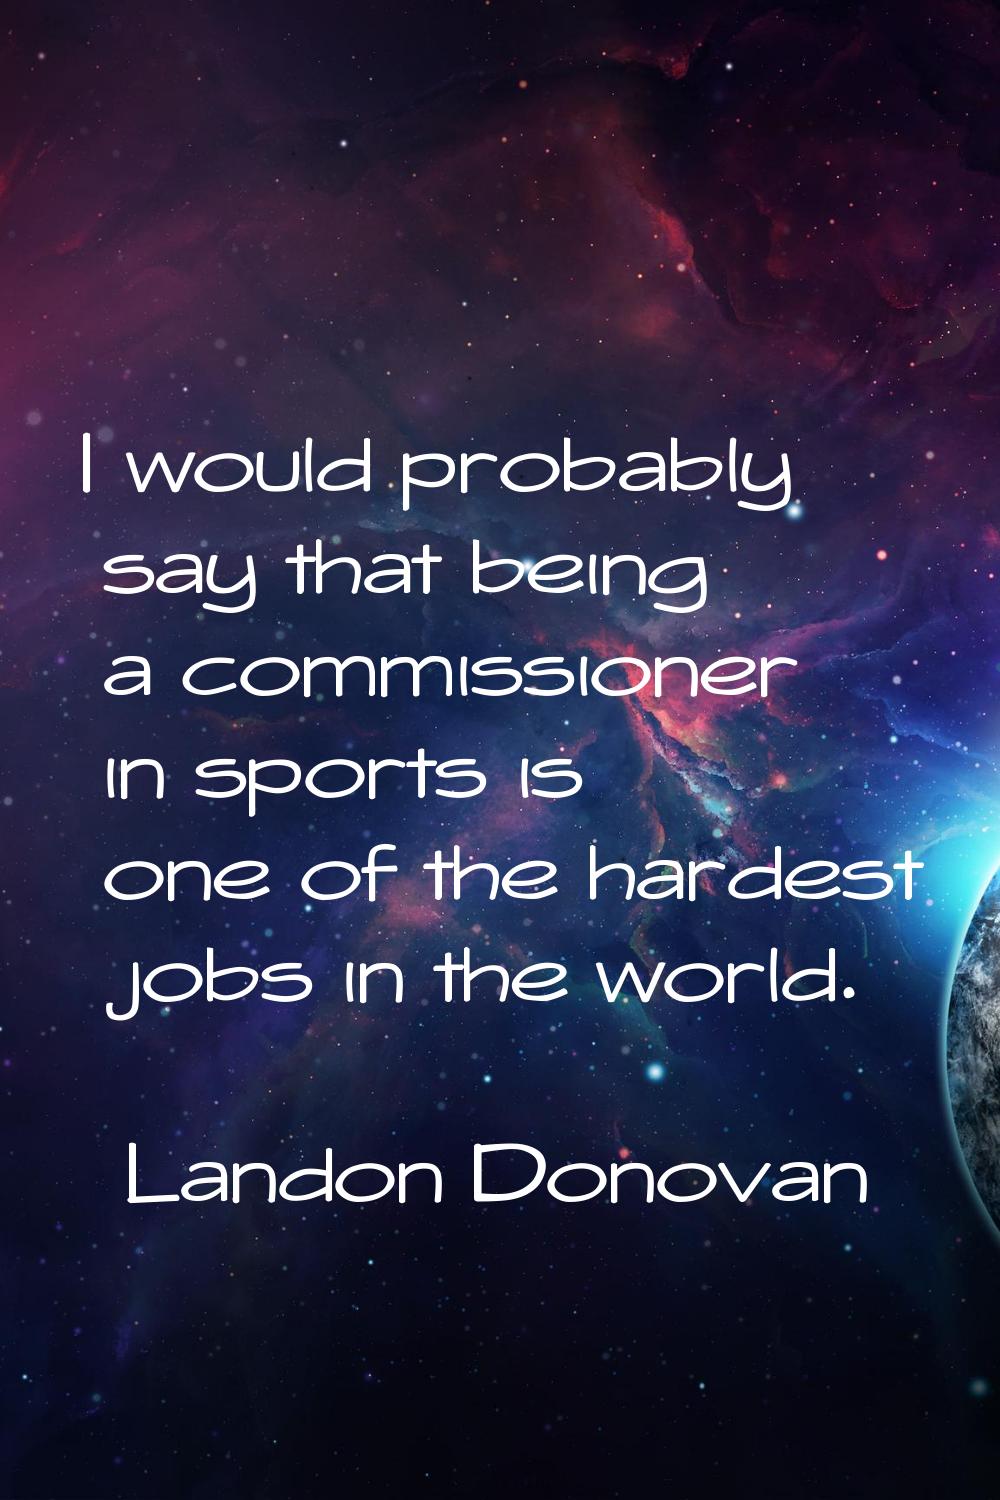 I would probably say that being a commissioner in sports is one of the hardest jobs in the world.